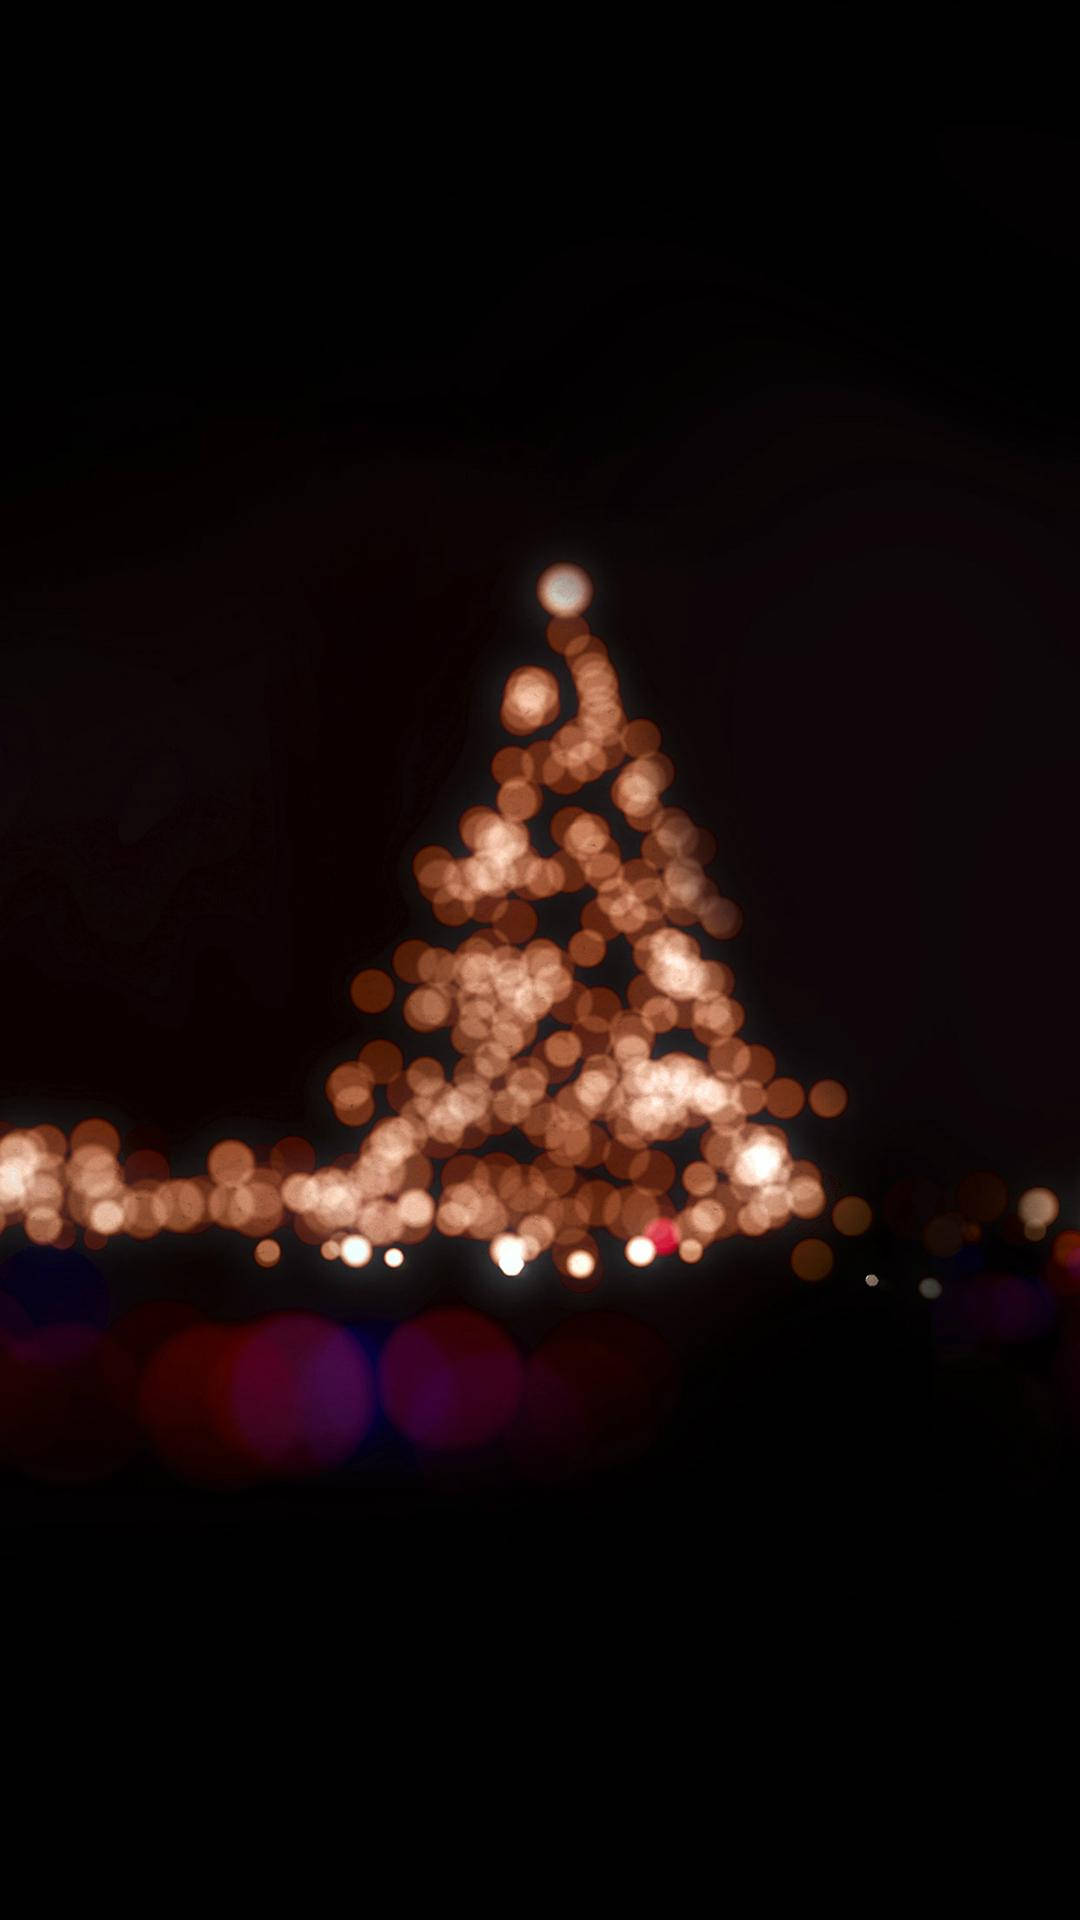 Feel the Magic of Christmas with these Beautiful Lights Wallpaper